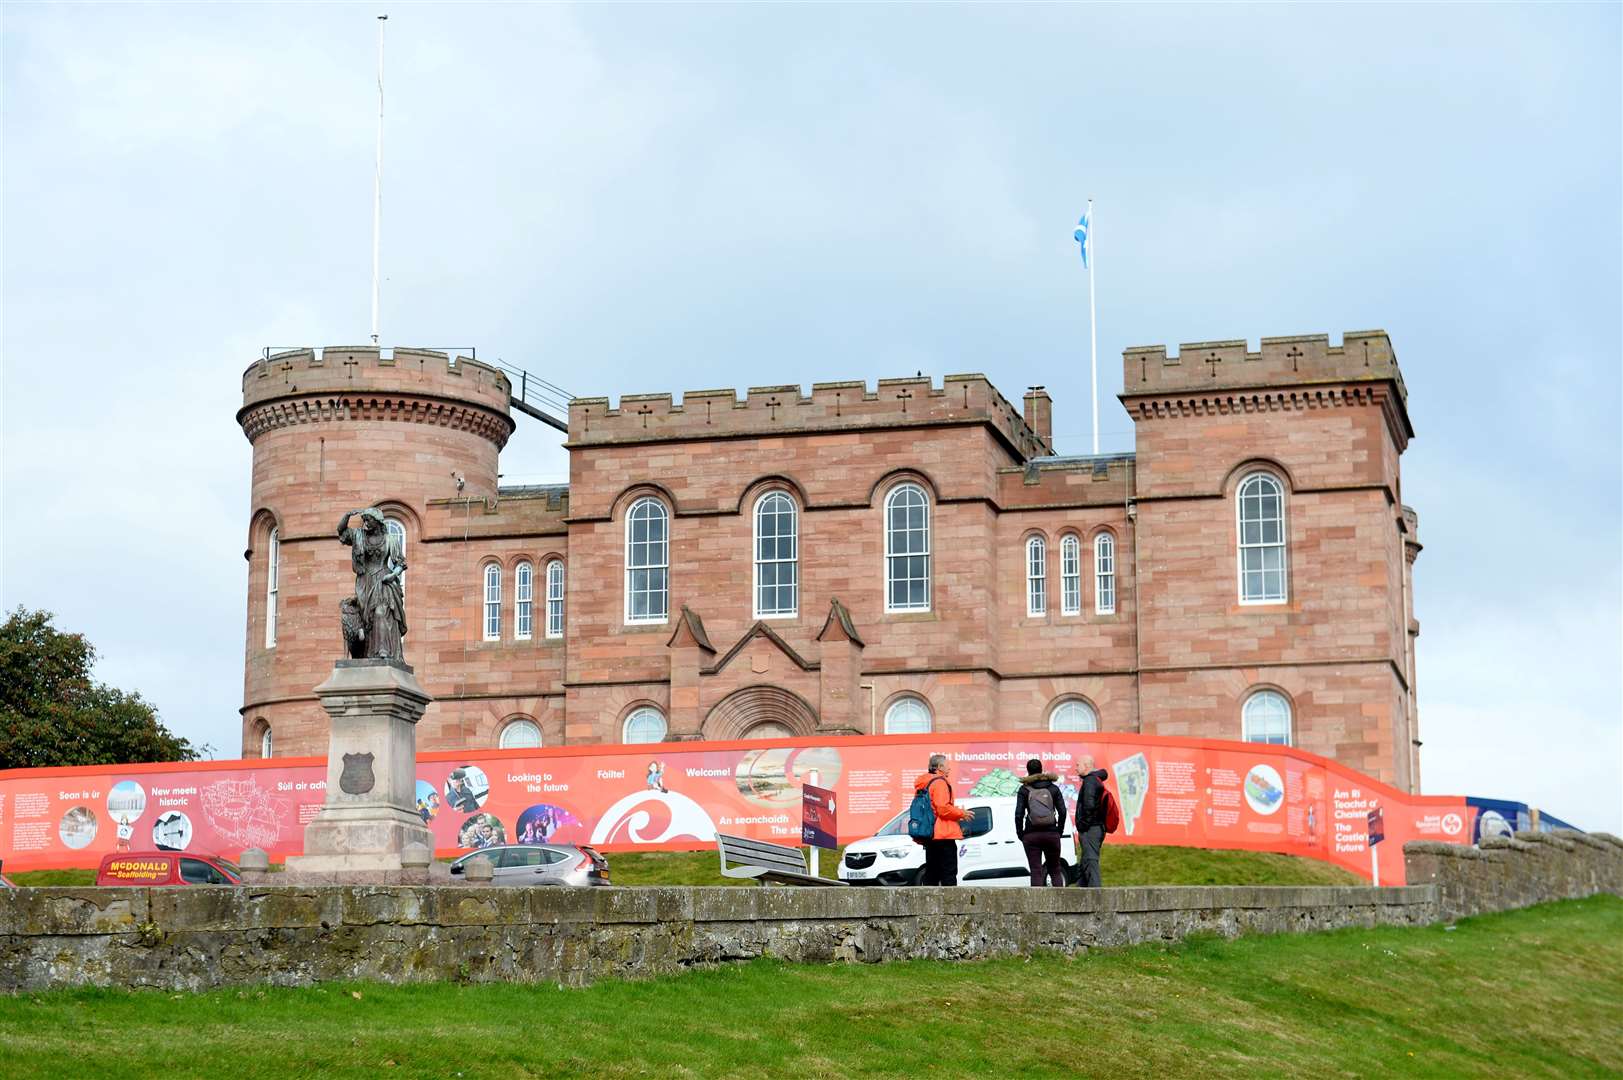 Storyboards are displayed on hoardings at Inverness Castle.